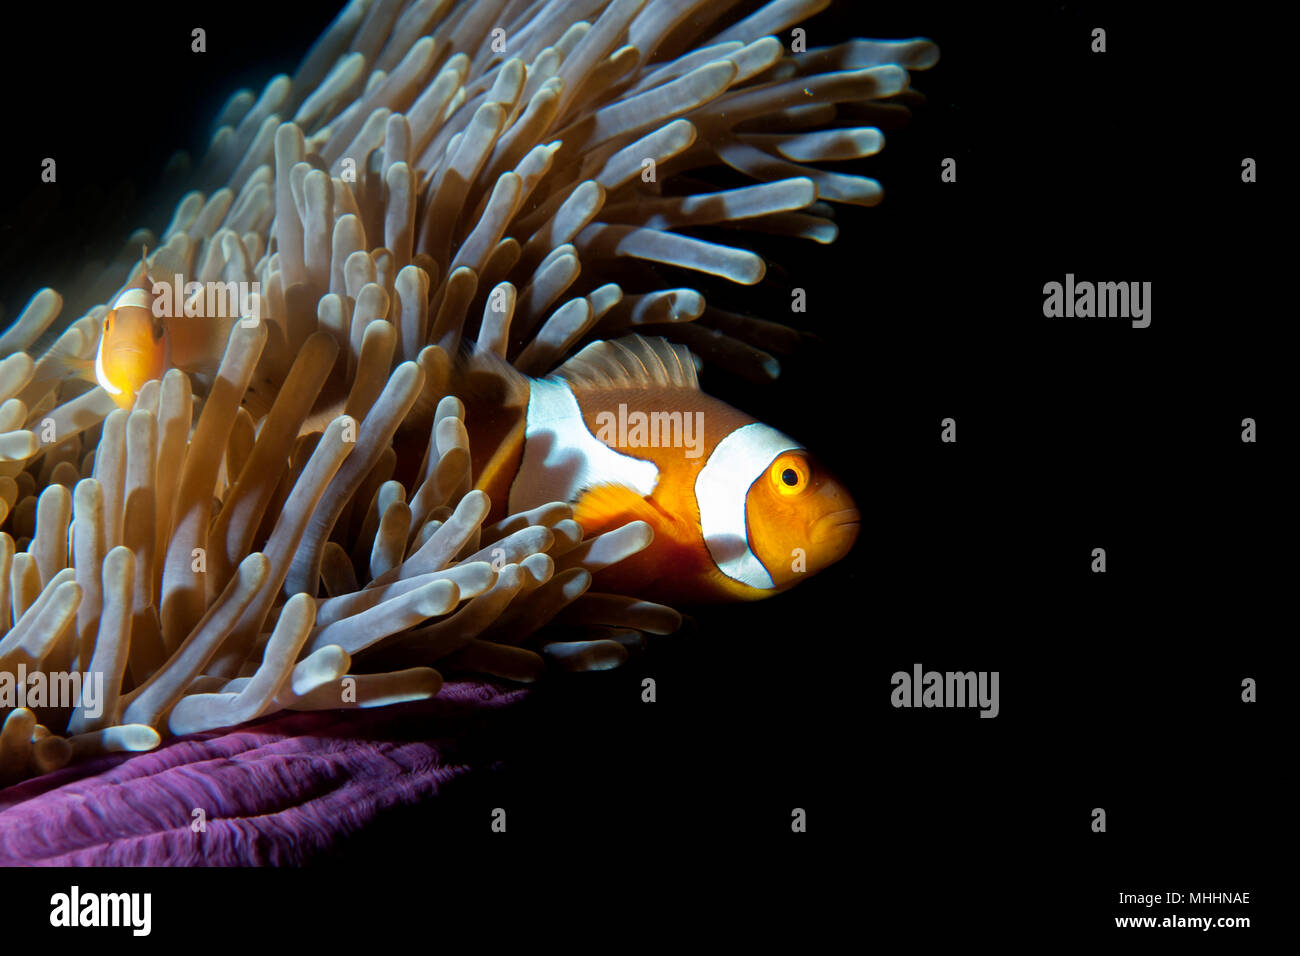 Clown fish in anemone on black background Stock Photo